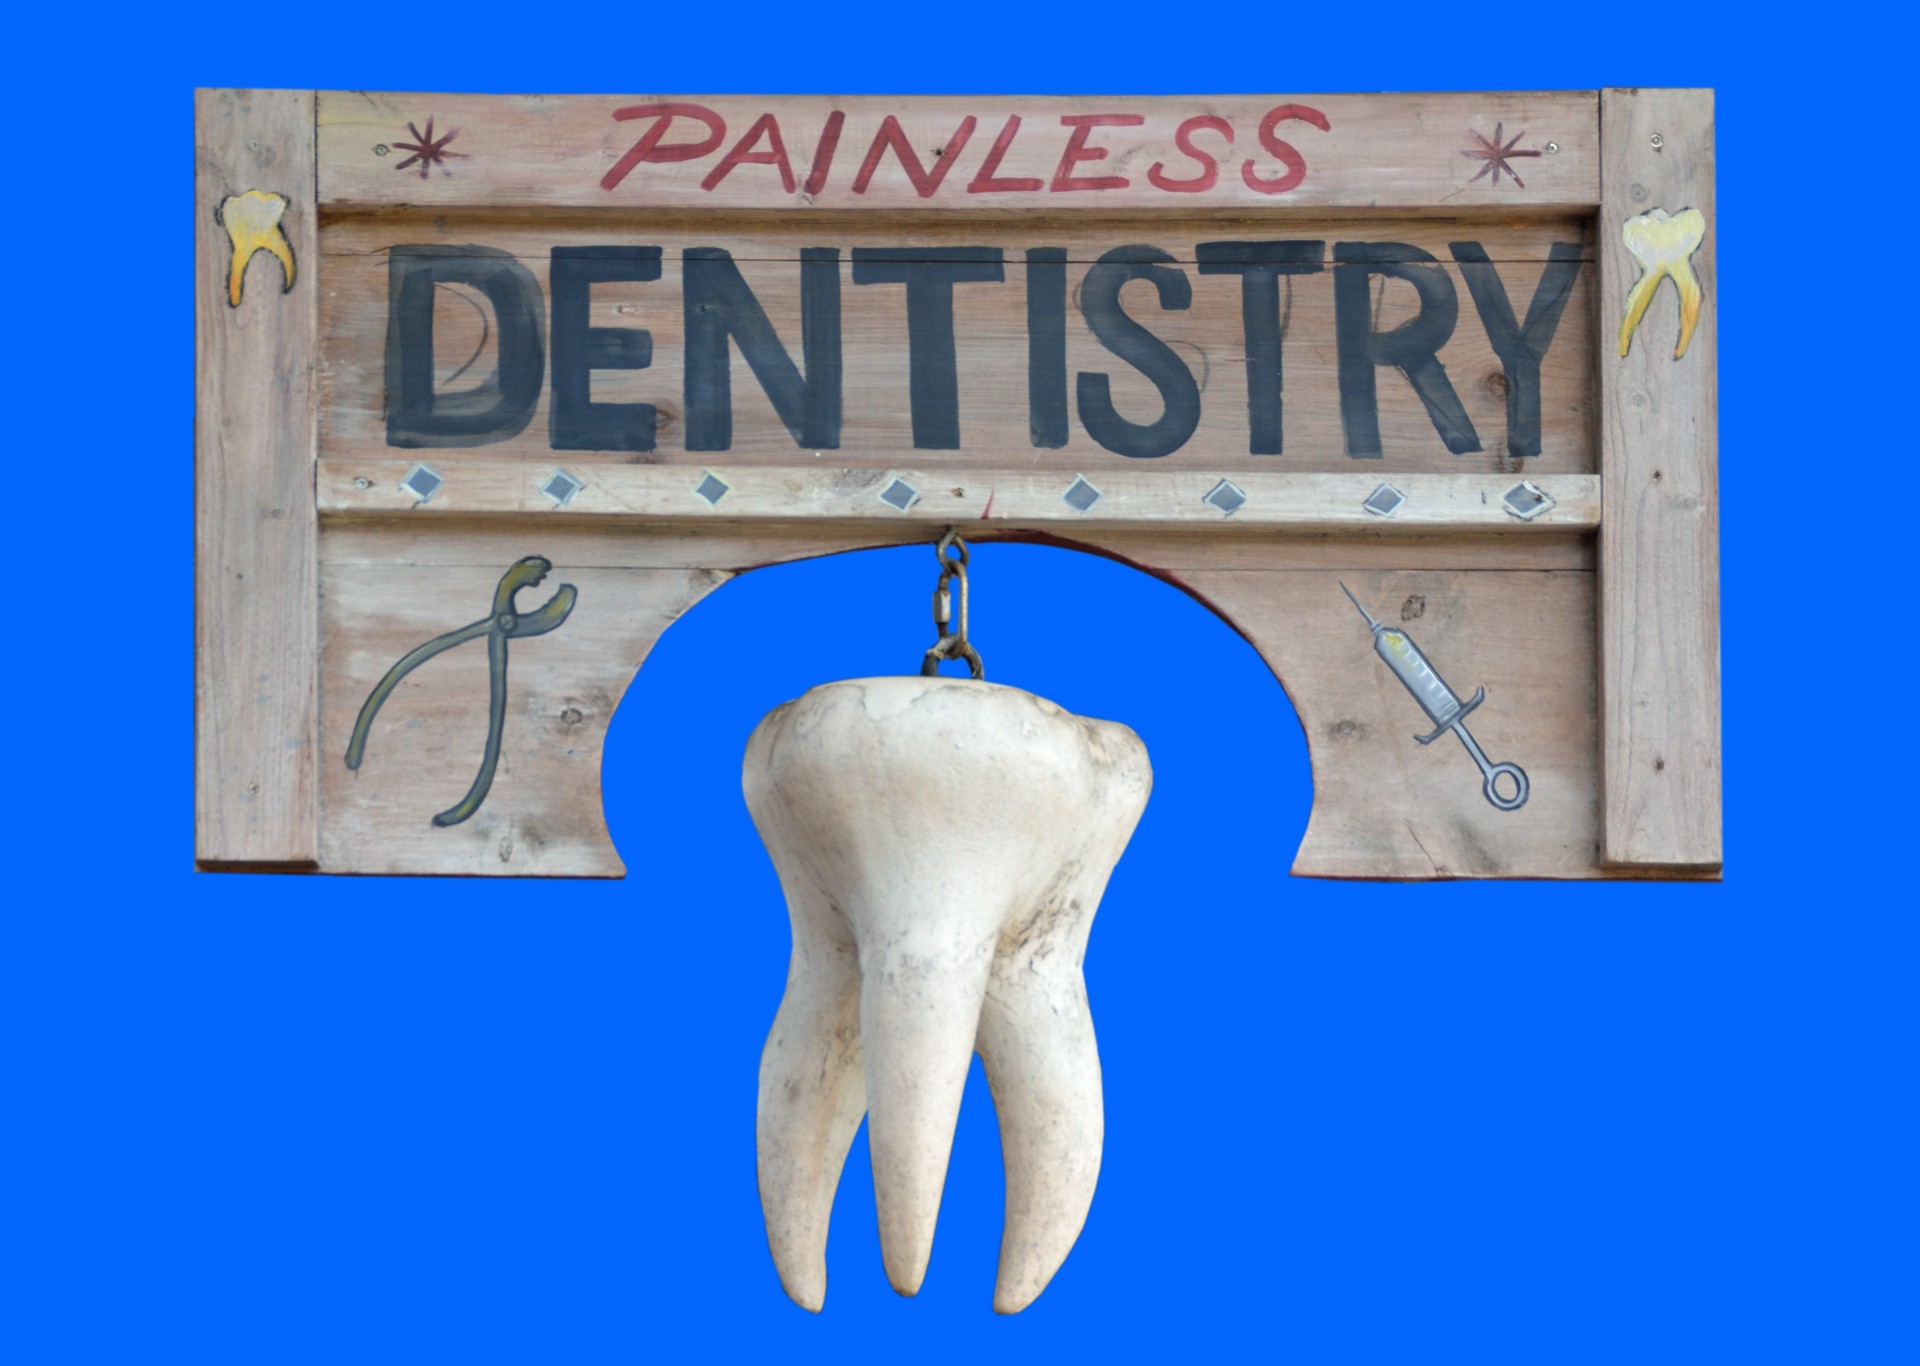 painless dentistry sign free photo